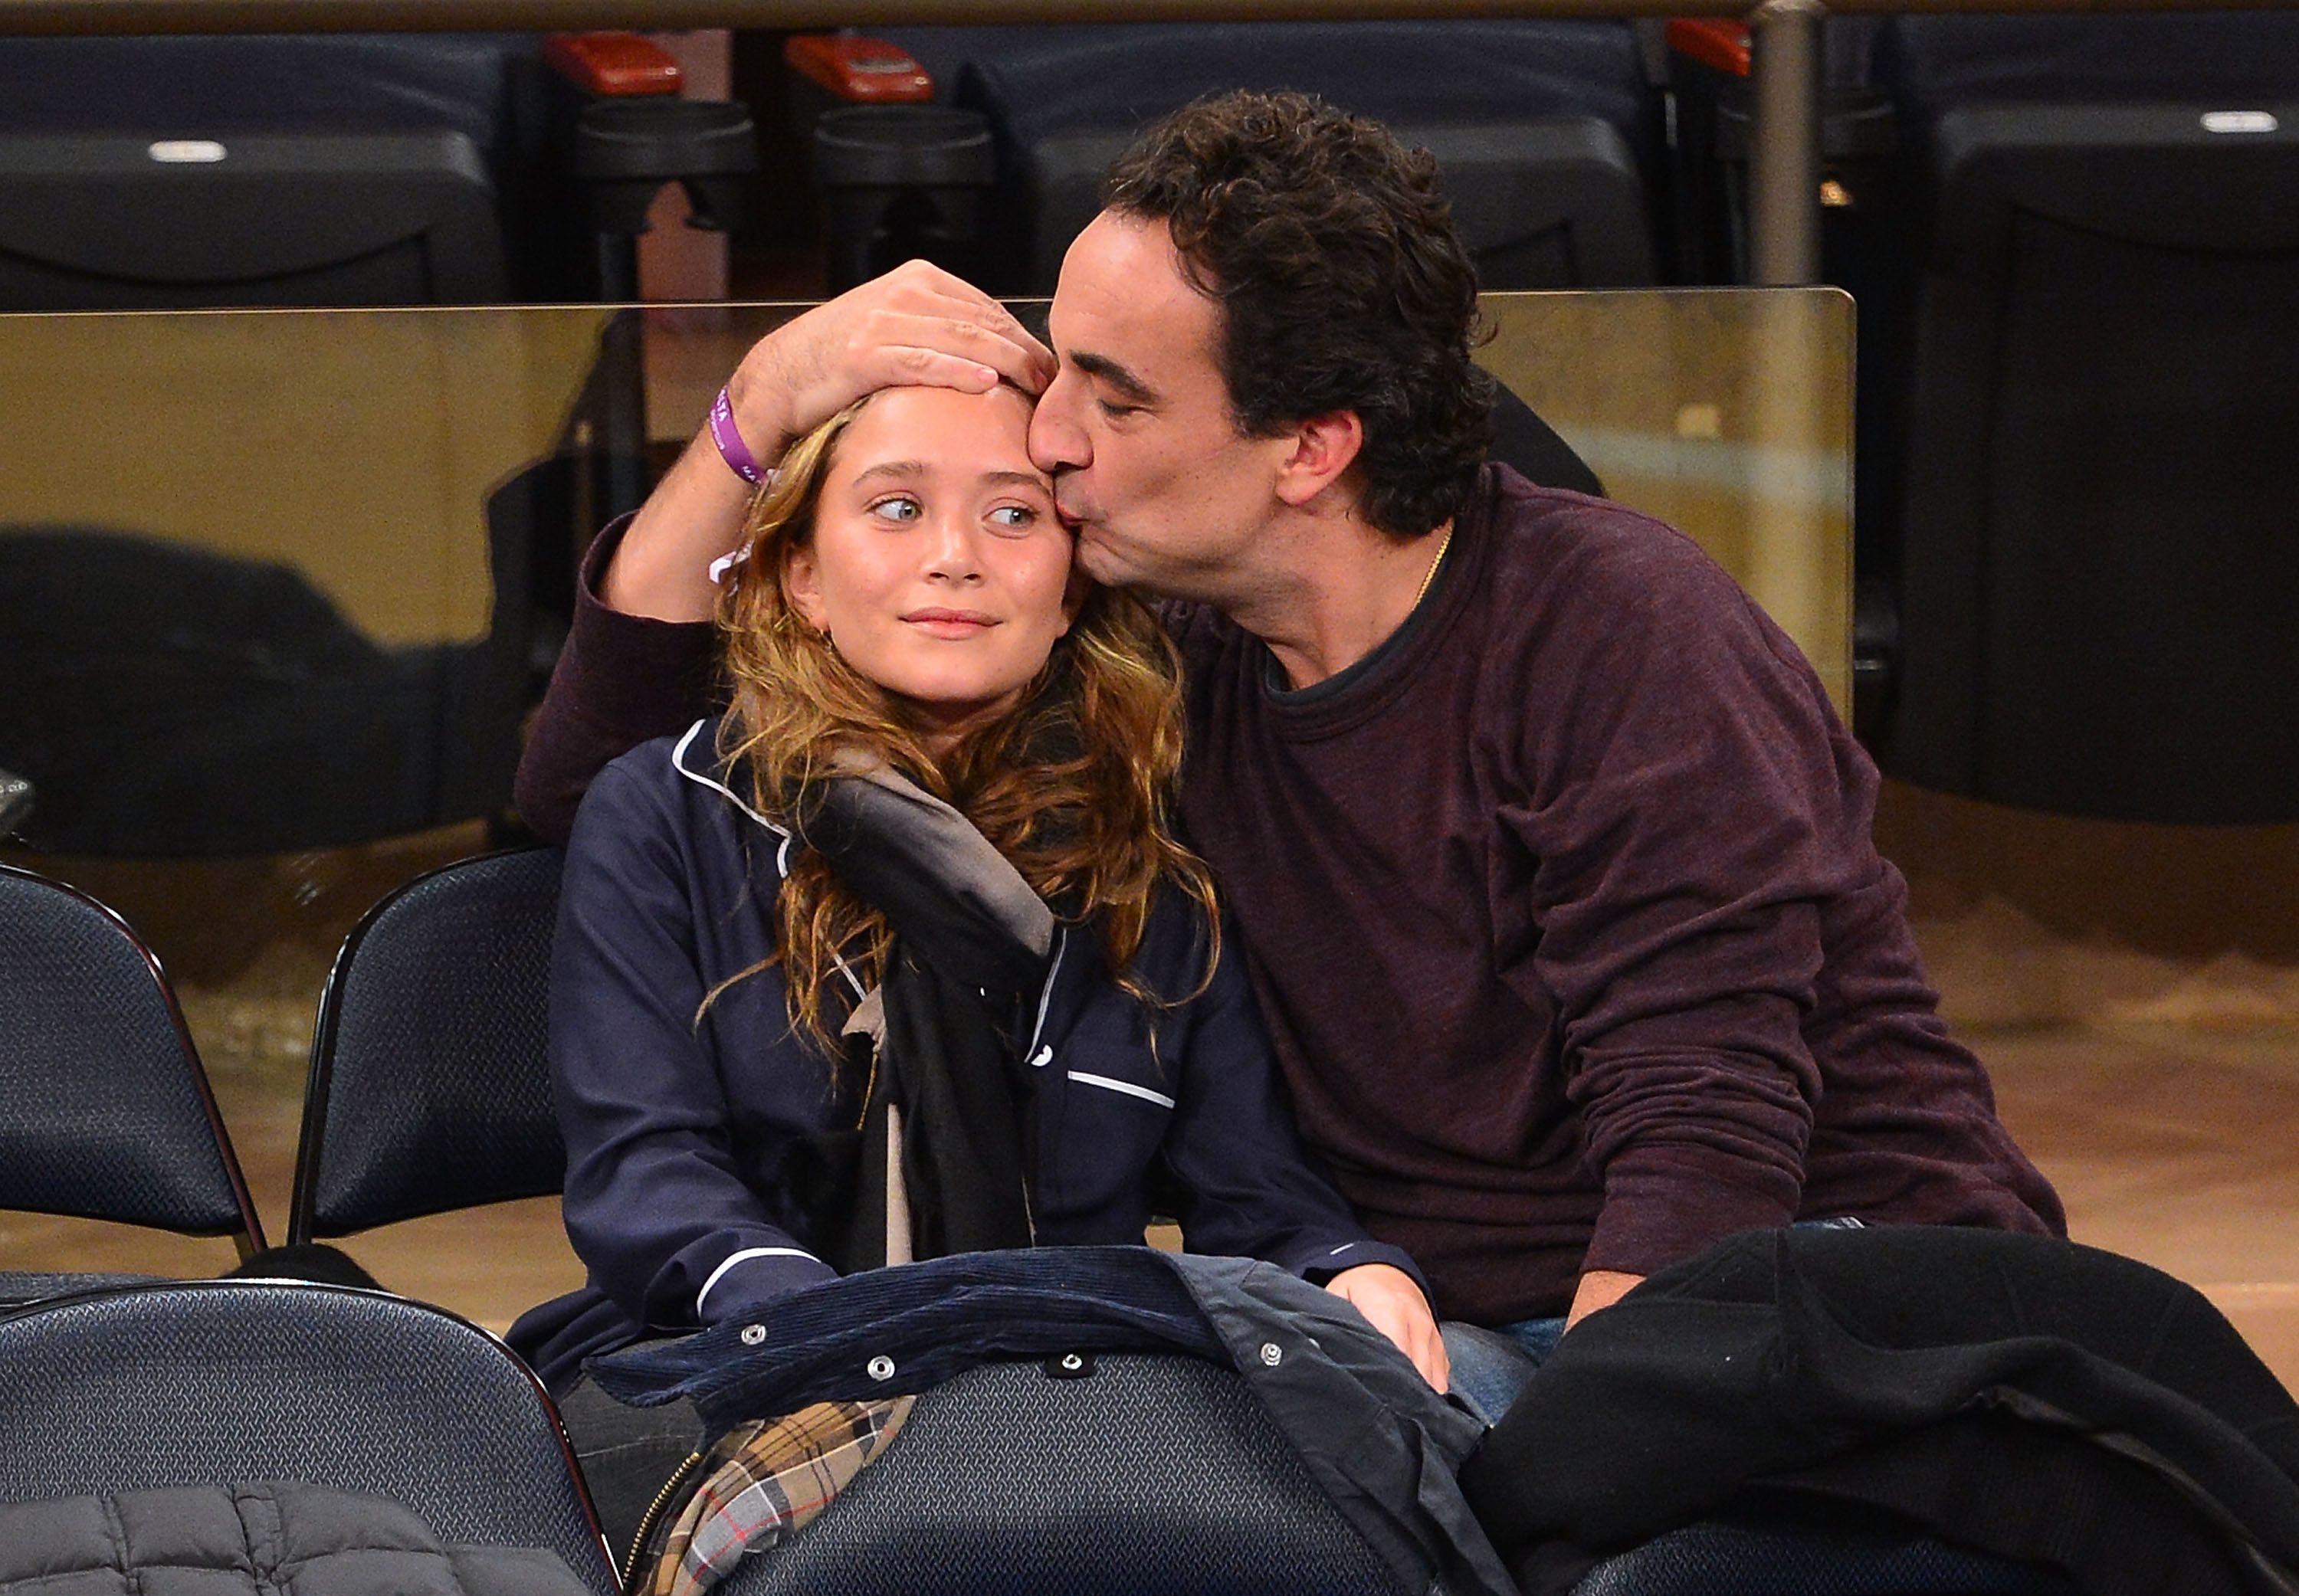 Mary-Kate Olsen and Olivier Sarkozy at the Dallas Mavericks vs New York Knicks game on November 9, 2012, in New York City | Photo: James Devaney/WireImage/Getty Images